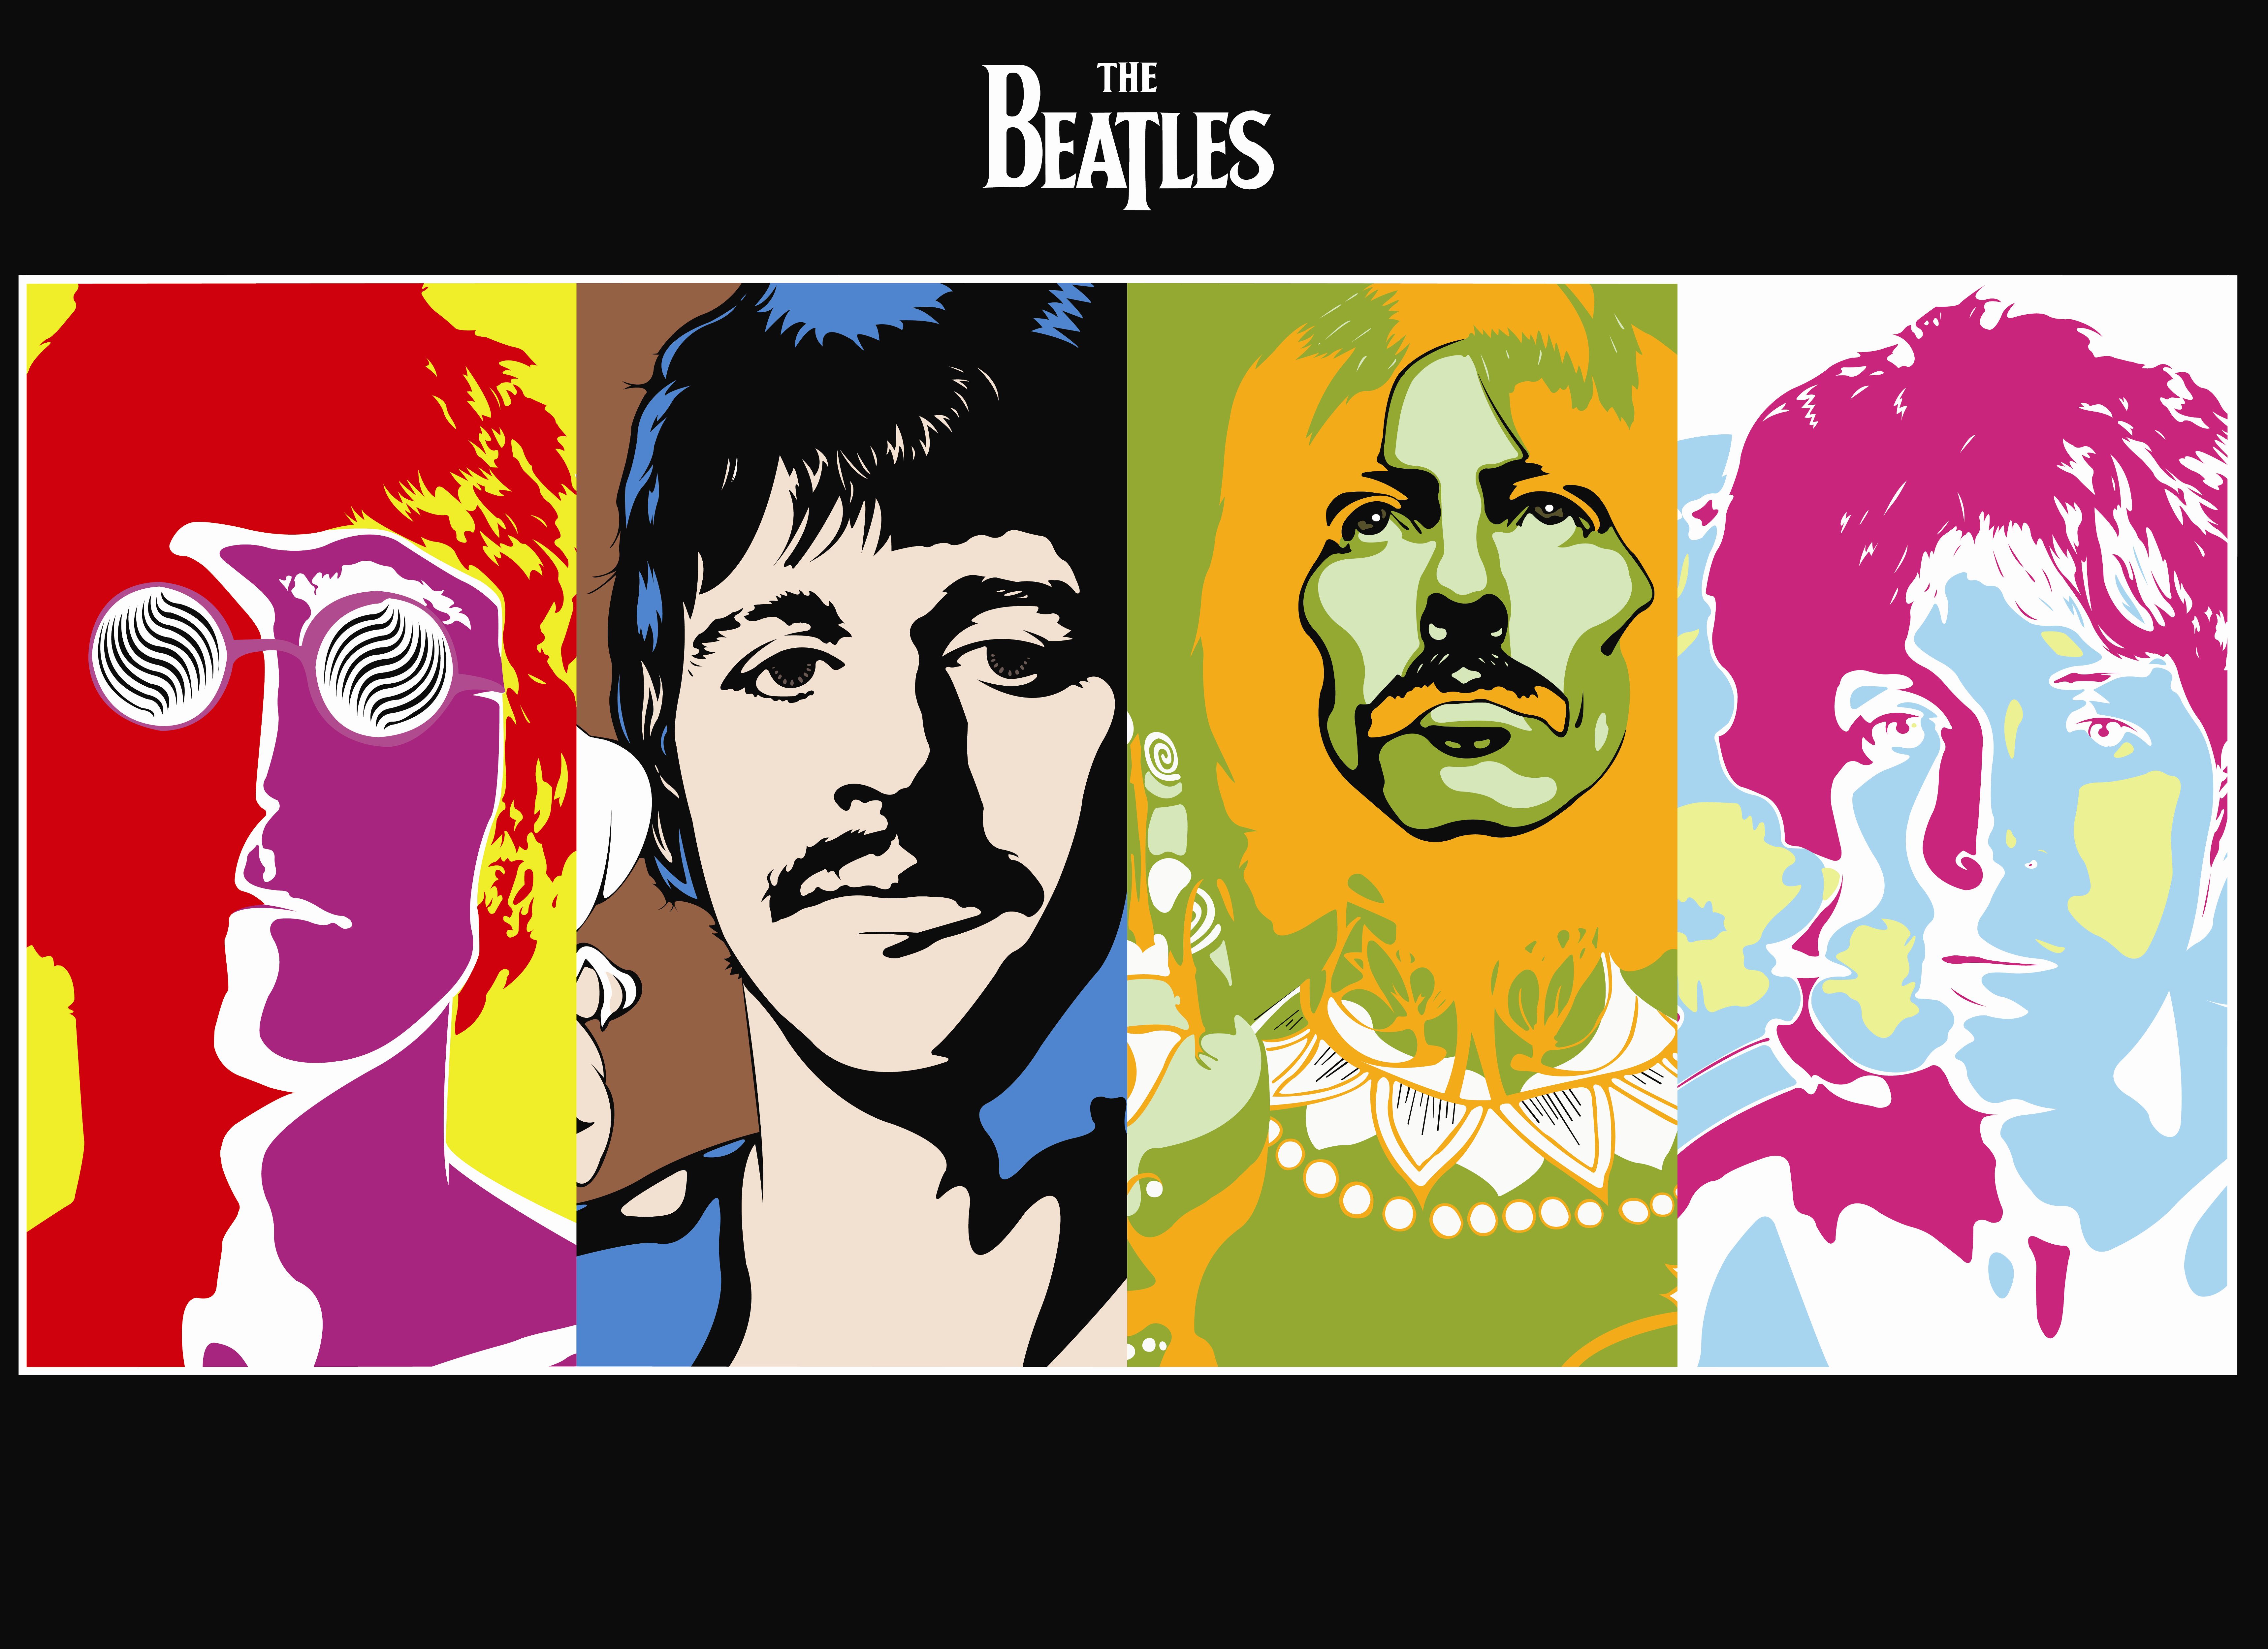 the beatles, music, within you and without you wallpapers for tablet